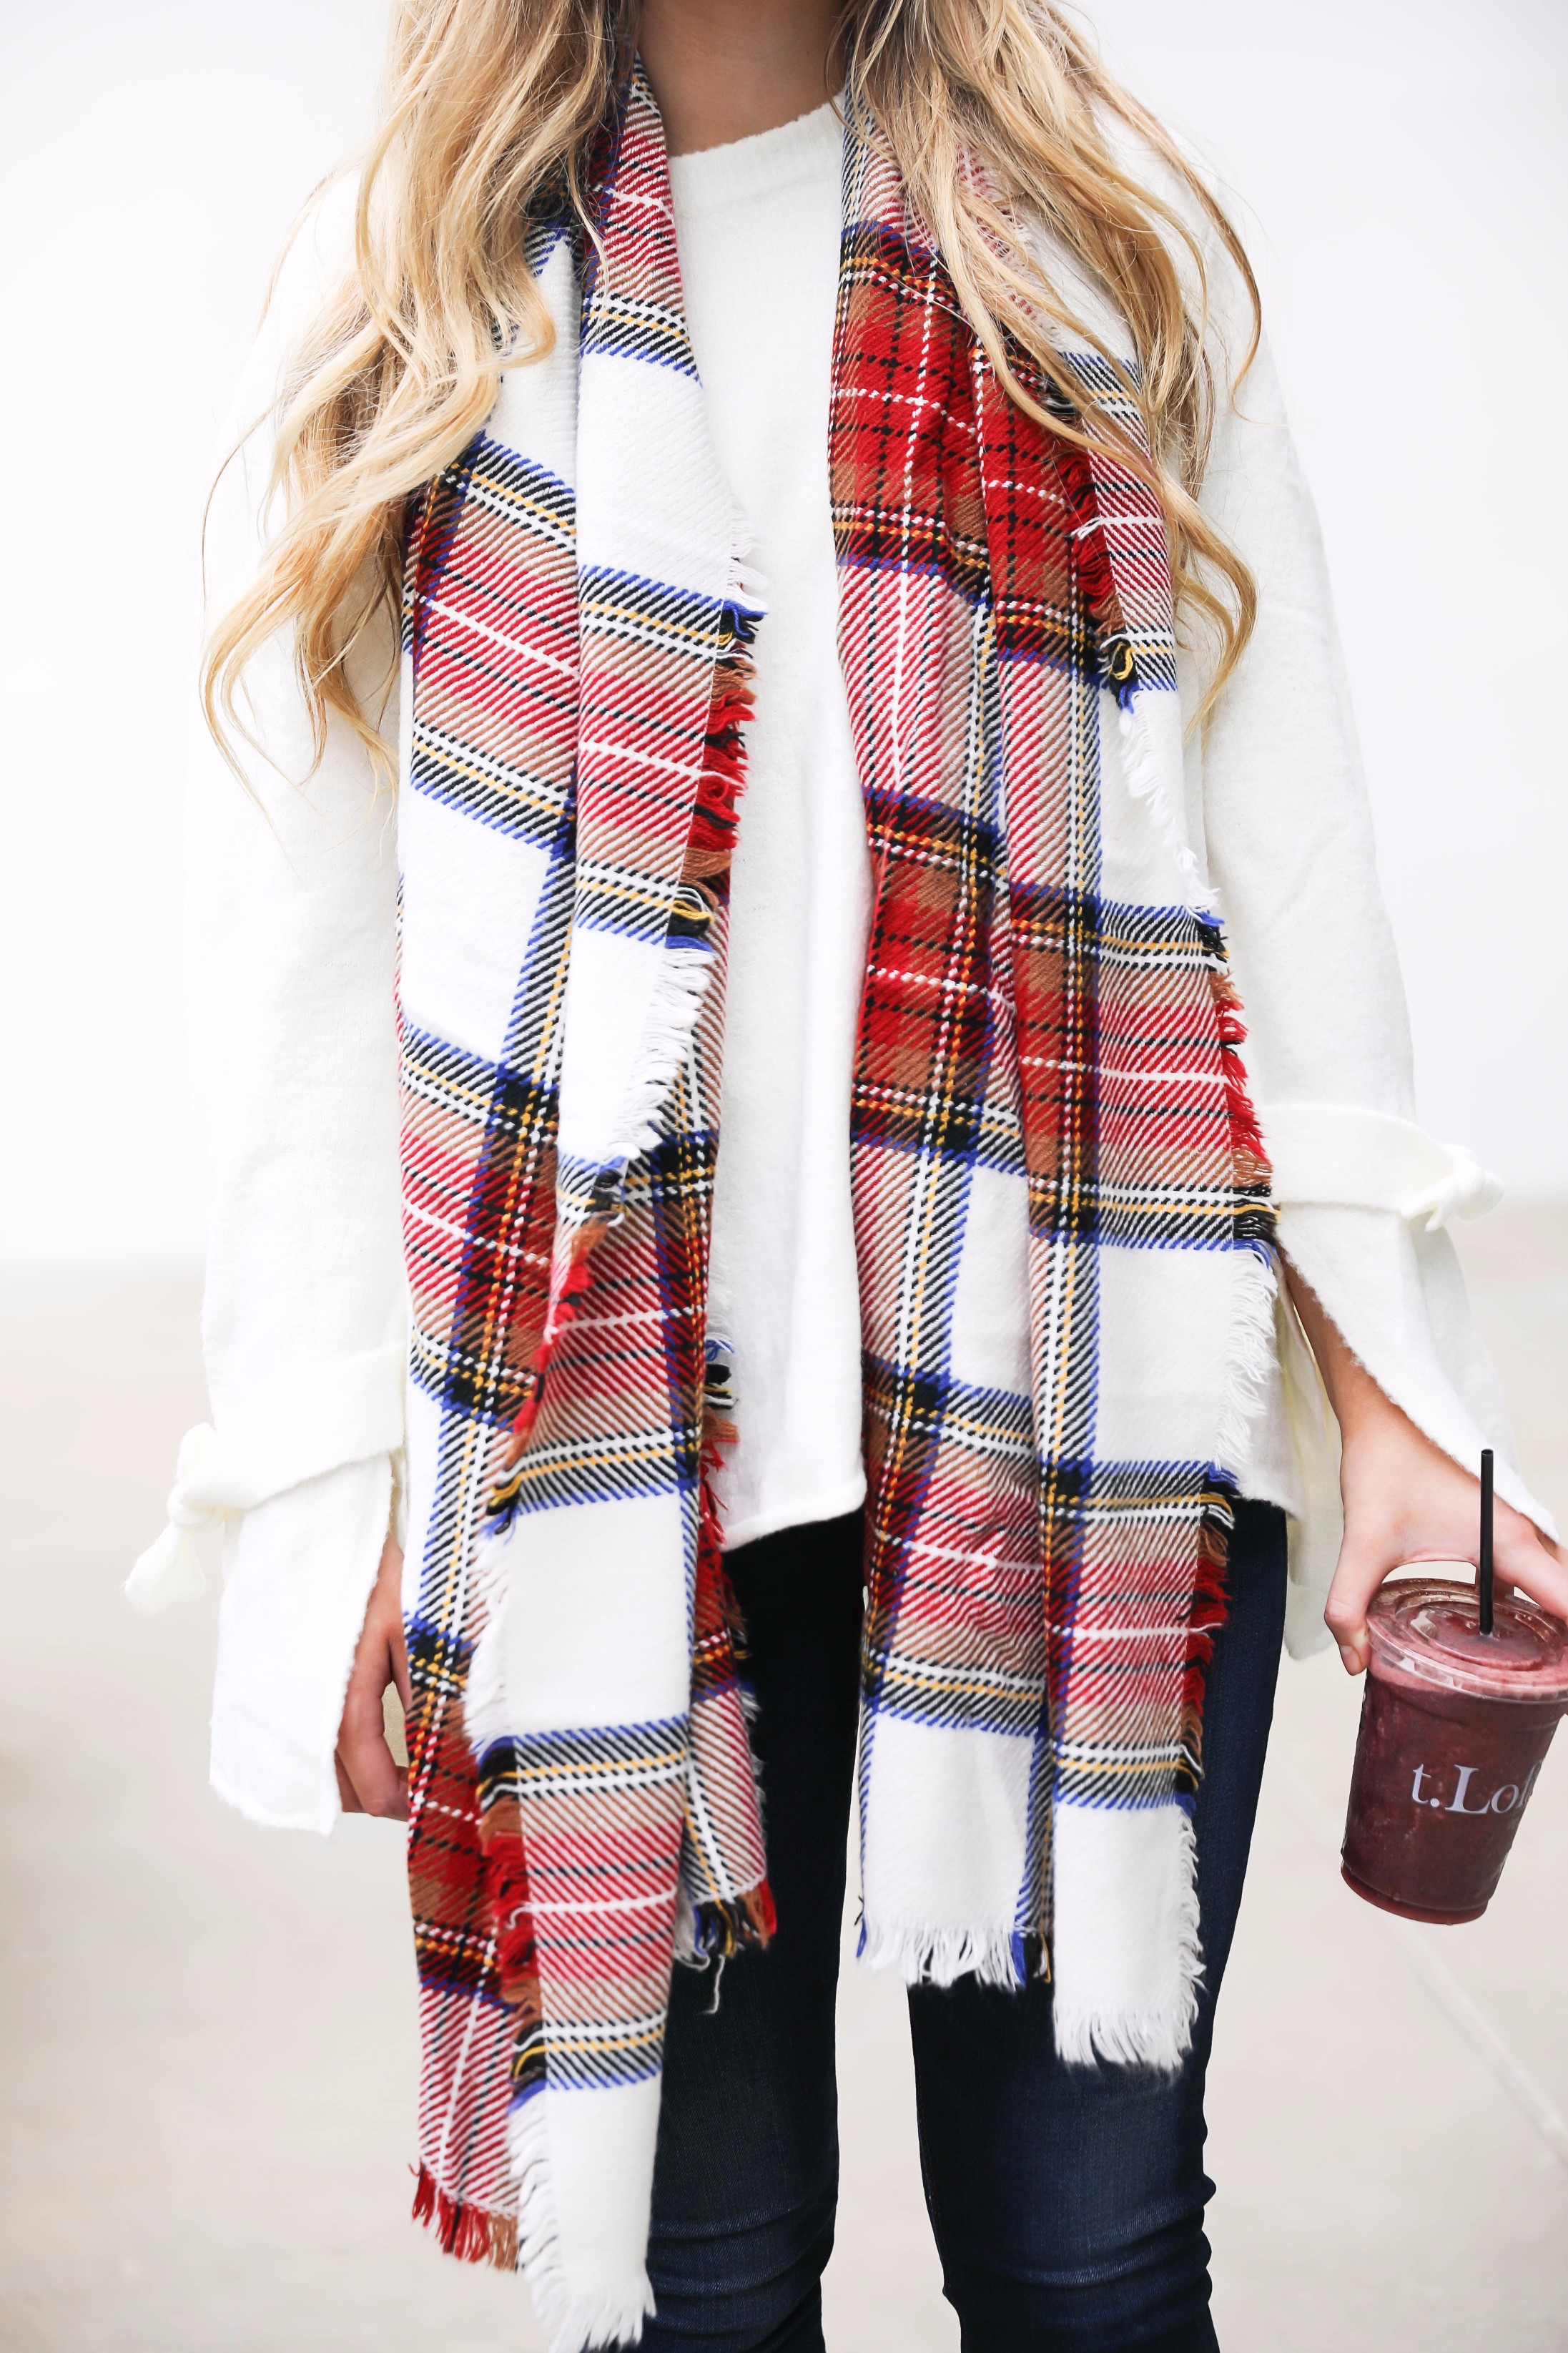 Tied bow sleeve sweater with a plaid blanket scarf! I love blanket scarves for fall. This outfit is perfect with dark jeans and booties! Details on fashion blog daily dose of charm by lauren lindmark